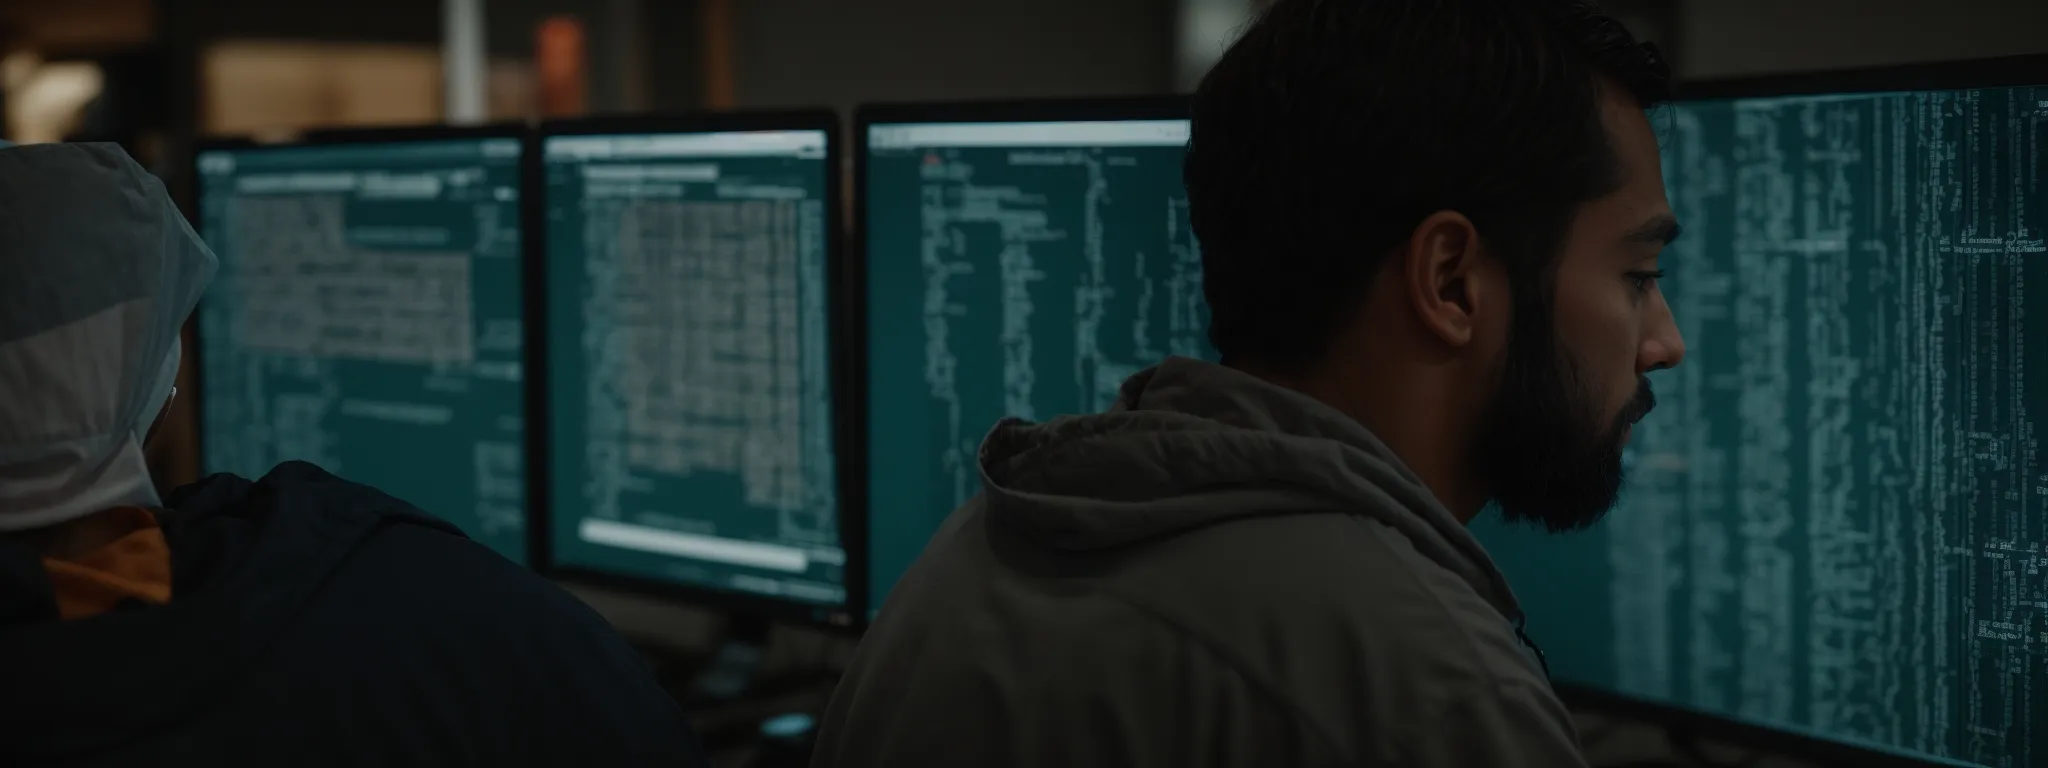 a web developer intently scrutinizes lines of code on a computer screen, symbolizing the meticulous on-page seo optimizations aimed at speeding up website performance.